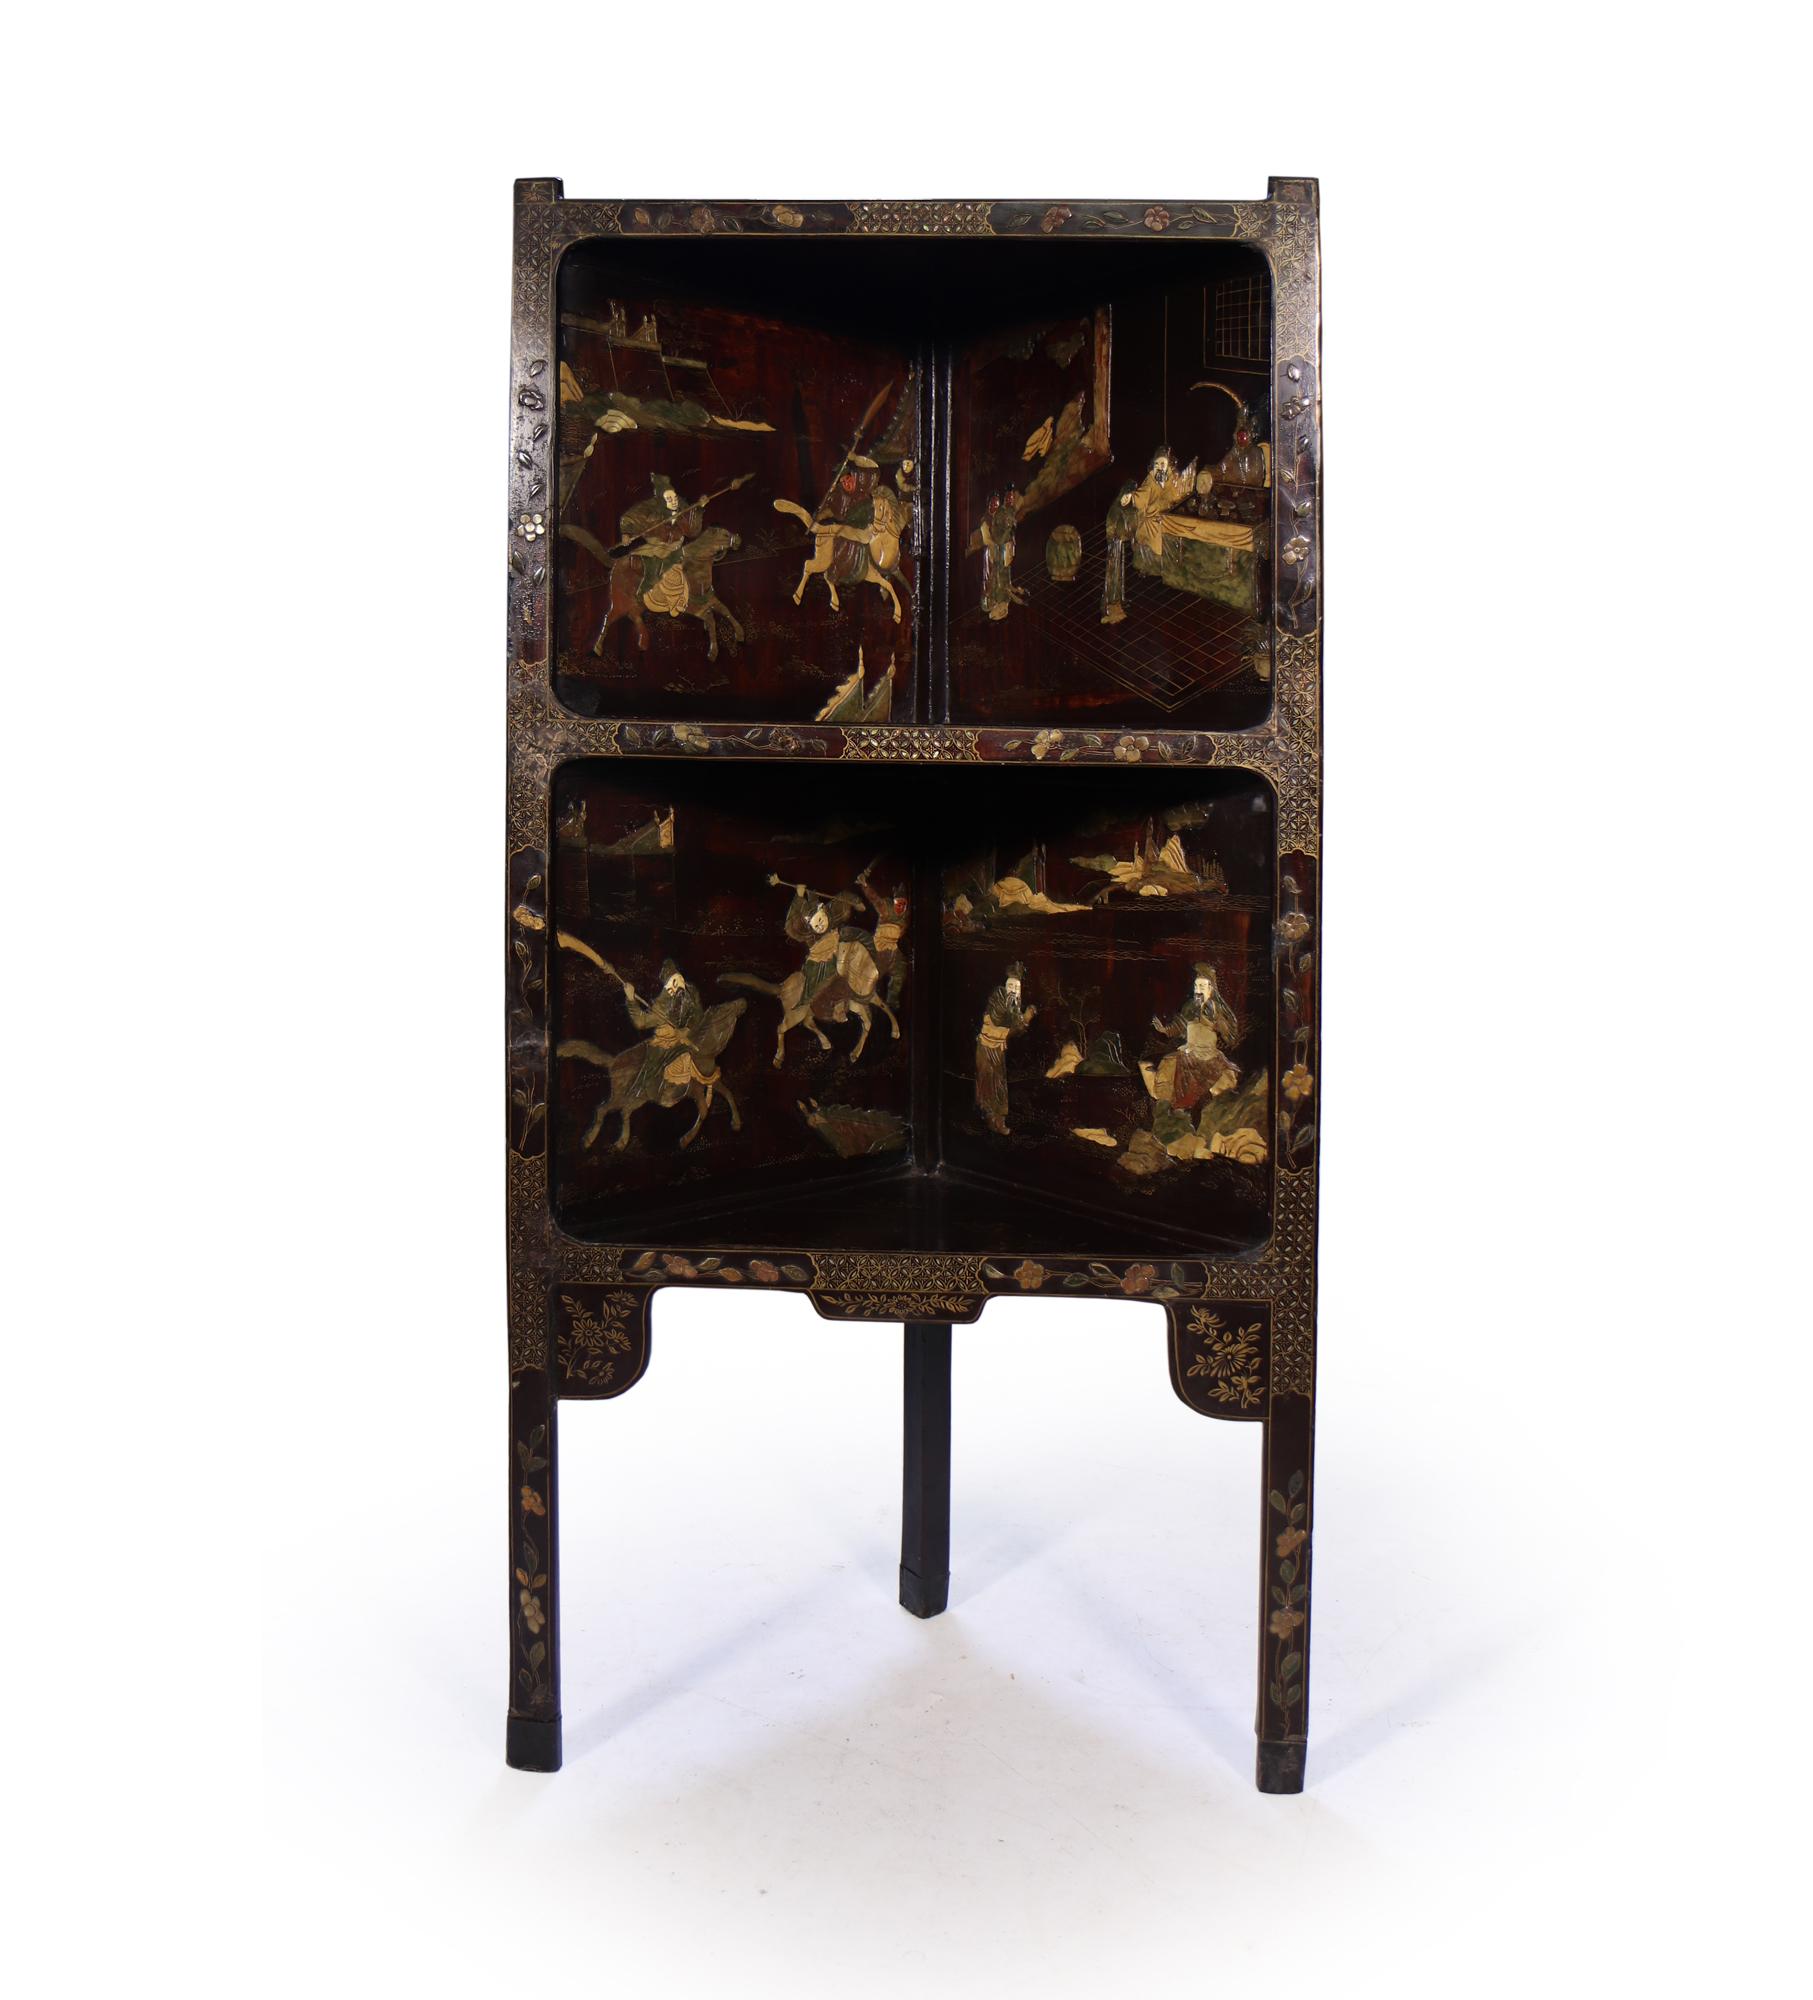 A Japanese lacquered corner stand with figures in battle on horses and home scenes in relief using carved ivory, jade, marble mother of pearl and gilt enamel. In very good condition with a few light repairs over the years

Ivory license reference